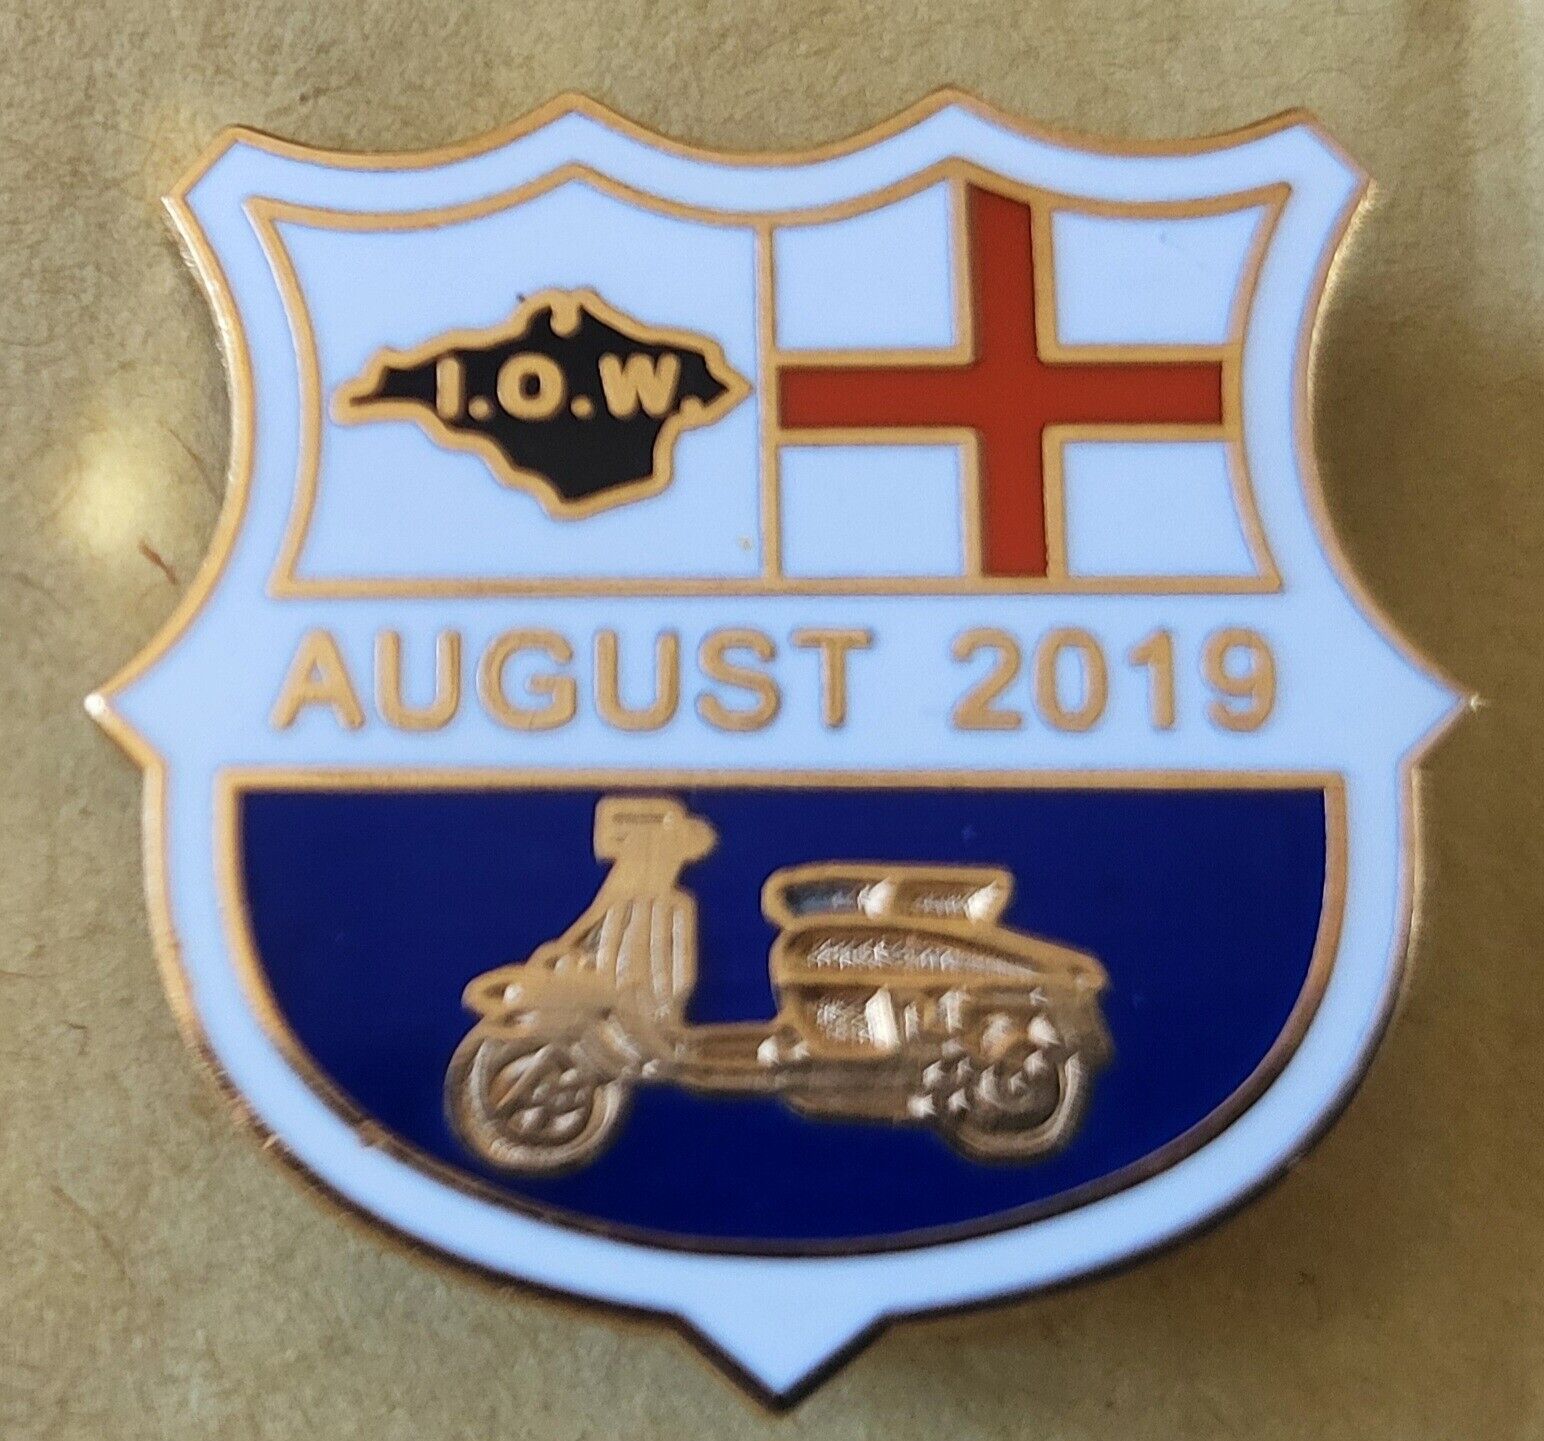 Lambretta Isle of Wight Scooter Rally August 2019 Badge  (Discounted Postage UK)